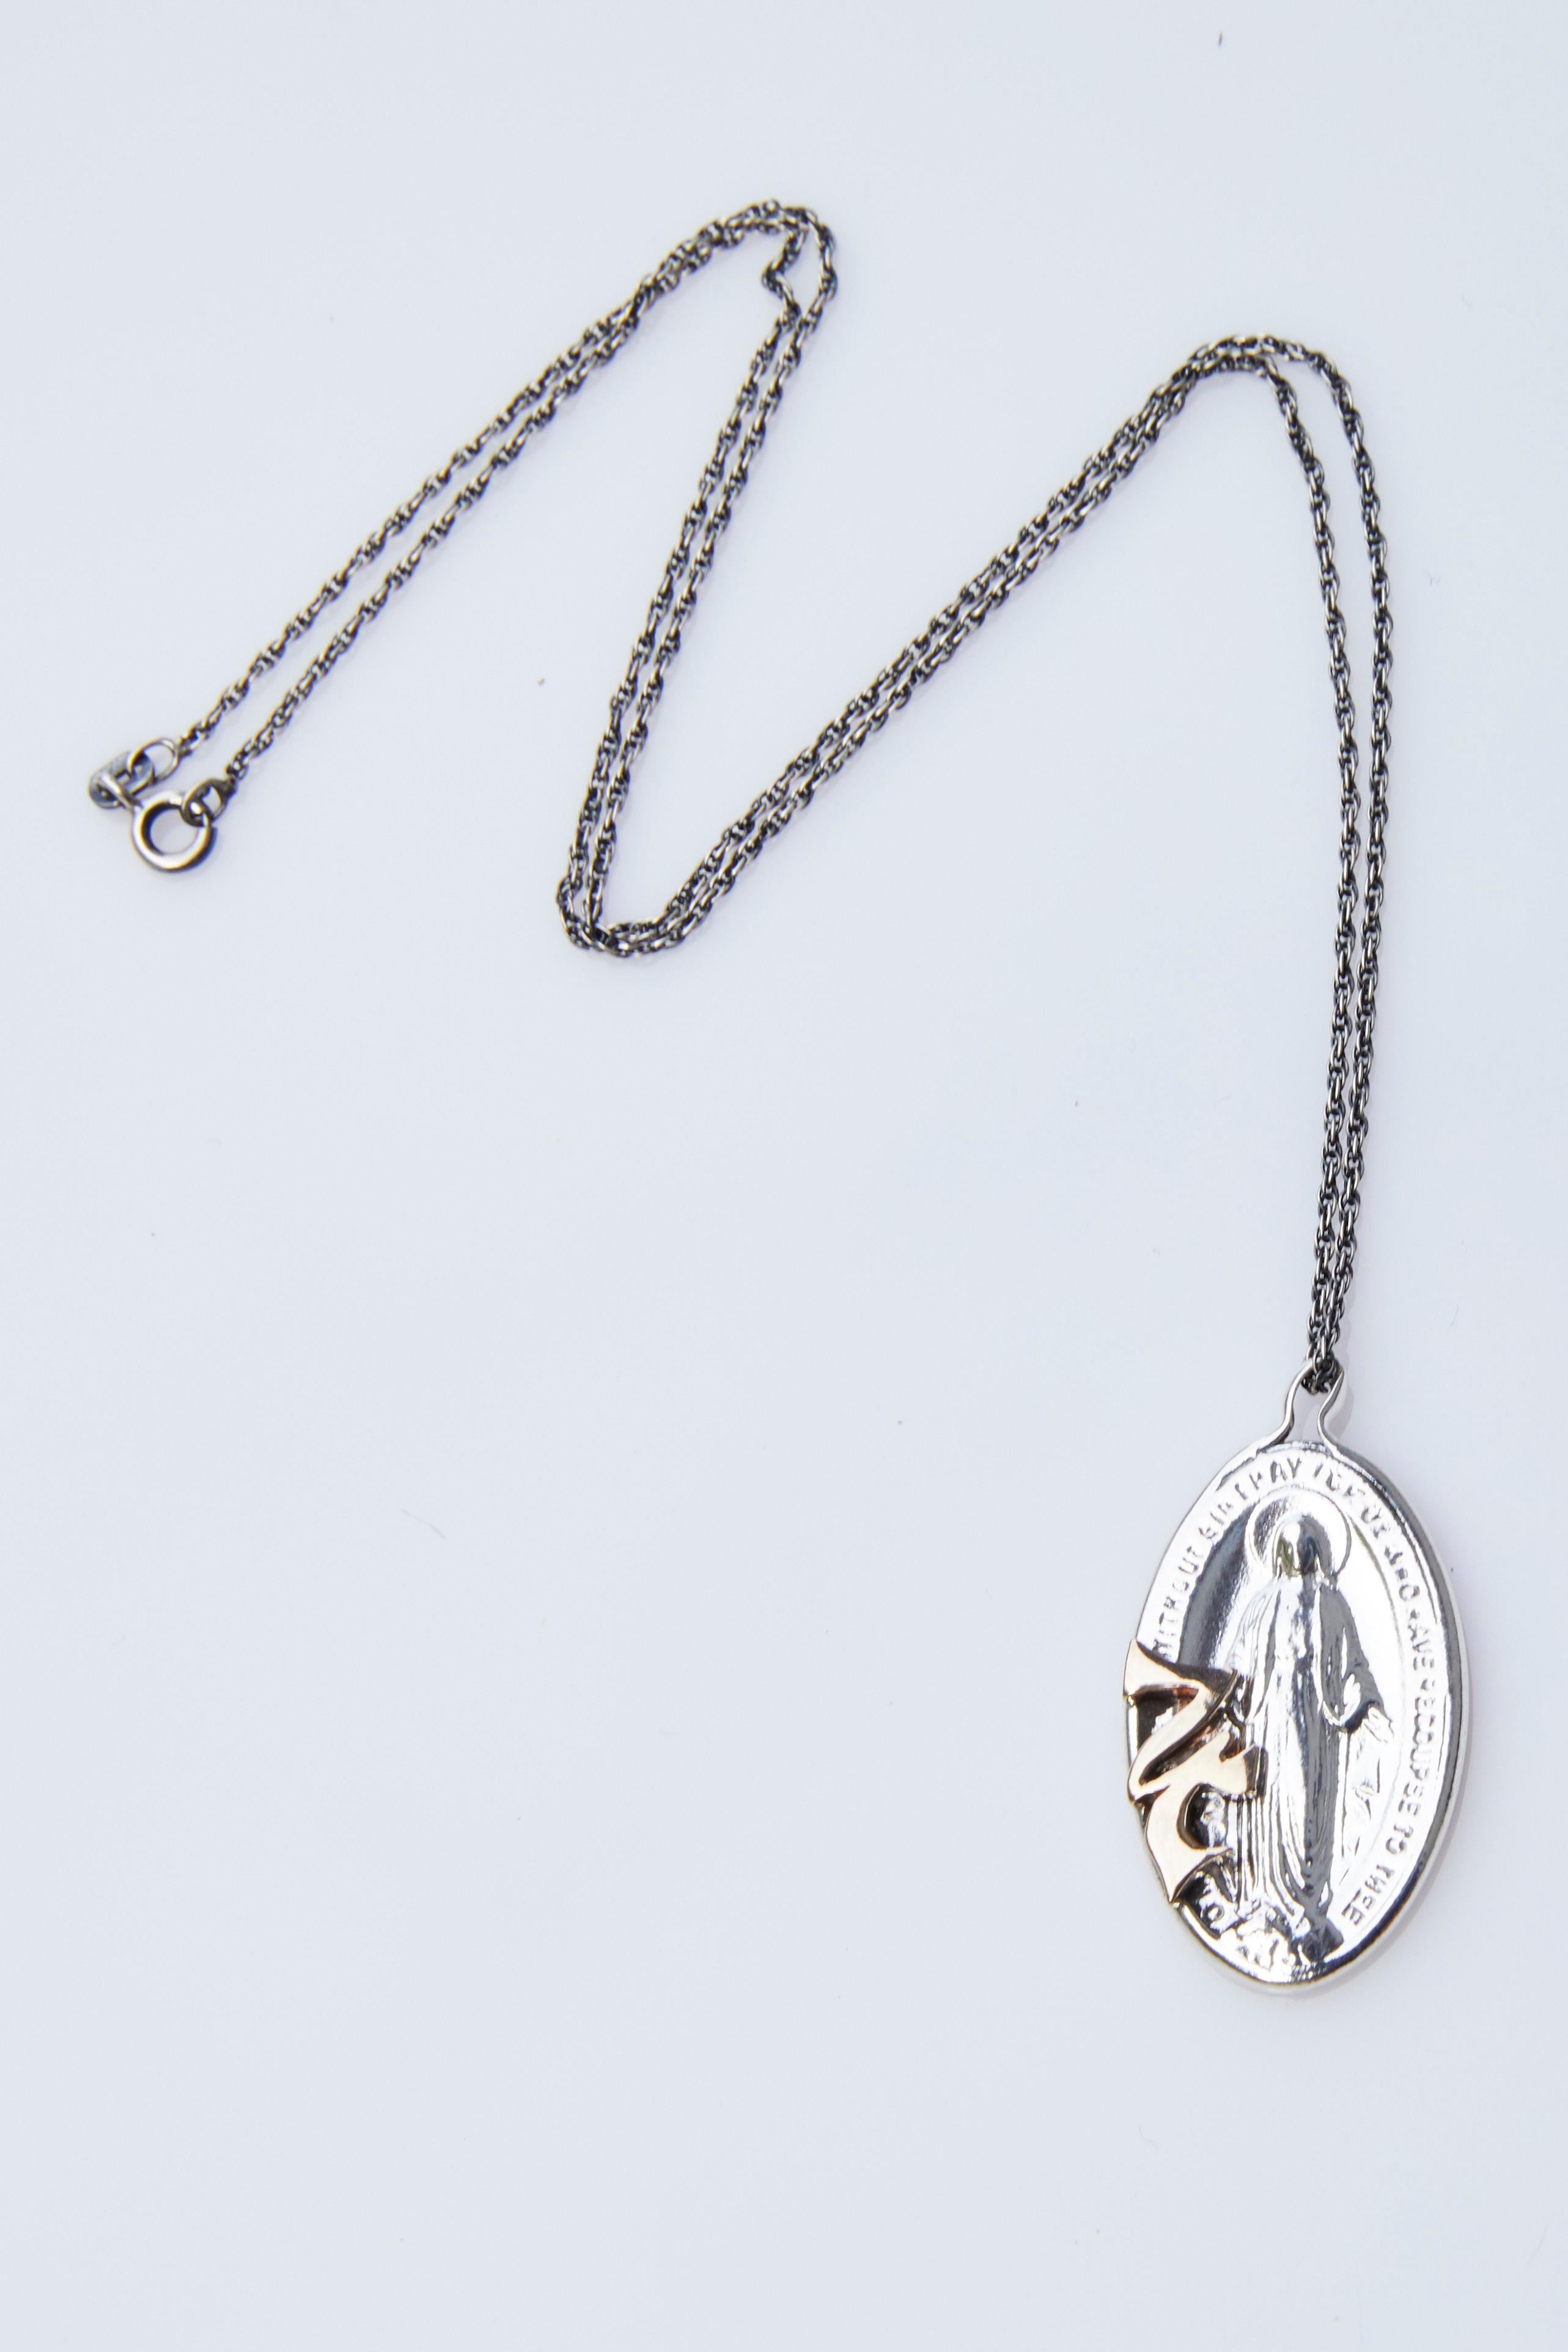 Contemporary Virgin Mary Medal Oval Jupiter Necklace Gold Silver J Dauphin For Sale